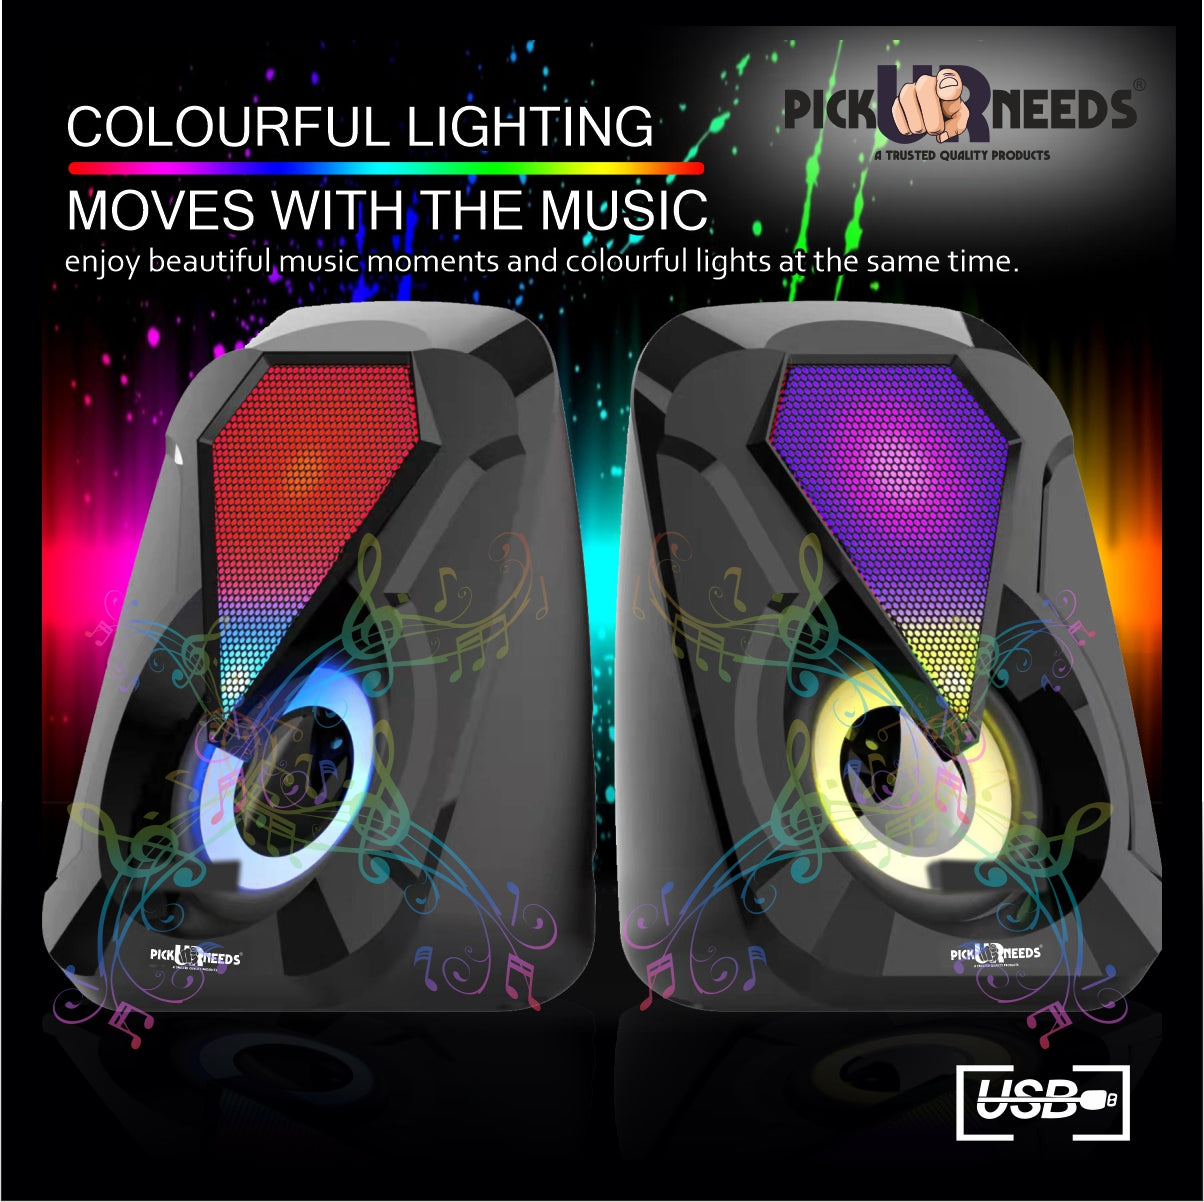 Pick Ur Needs Computer Speaker Multimedia Sound Bass Speakers with Colourful LED Modes System for PC Laptop